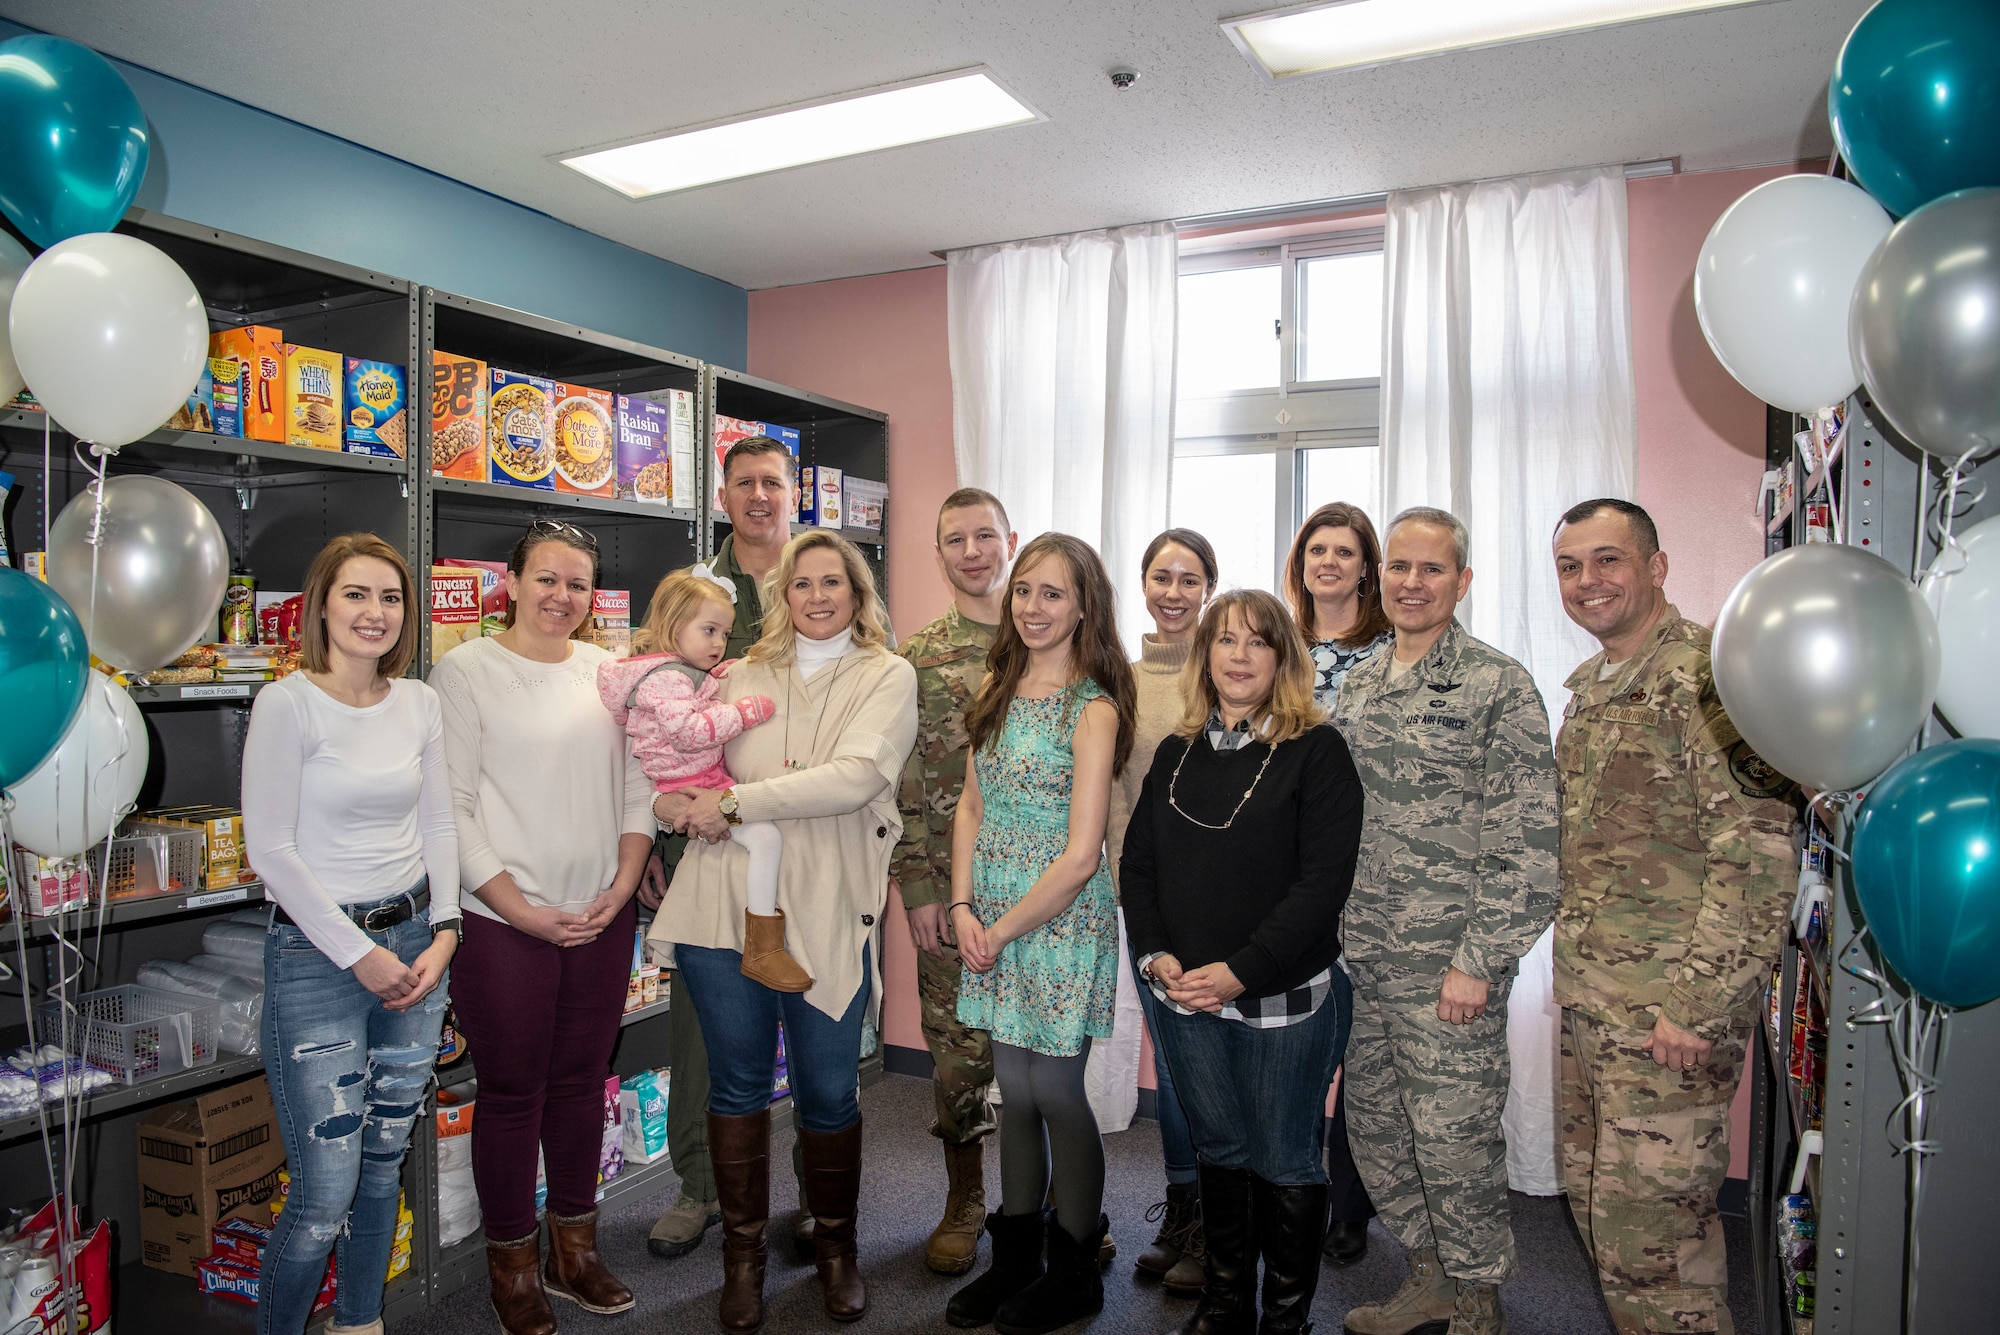 Thrift Shop volunteers and 35th Fighter Wing Misawa Air Base leadership pause for a photo during the Misawa Thrift Shop food pantry opening at MAB, Japan, Jan. 29, 2019. The thrift shop now offers canned good giving Airmen the opportunity to stock up on essential food items when in need. (U.S. Air Force photo by Airman 1st Class Xiomara Martinez)